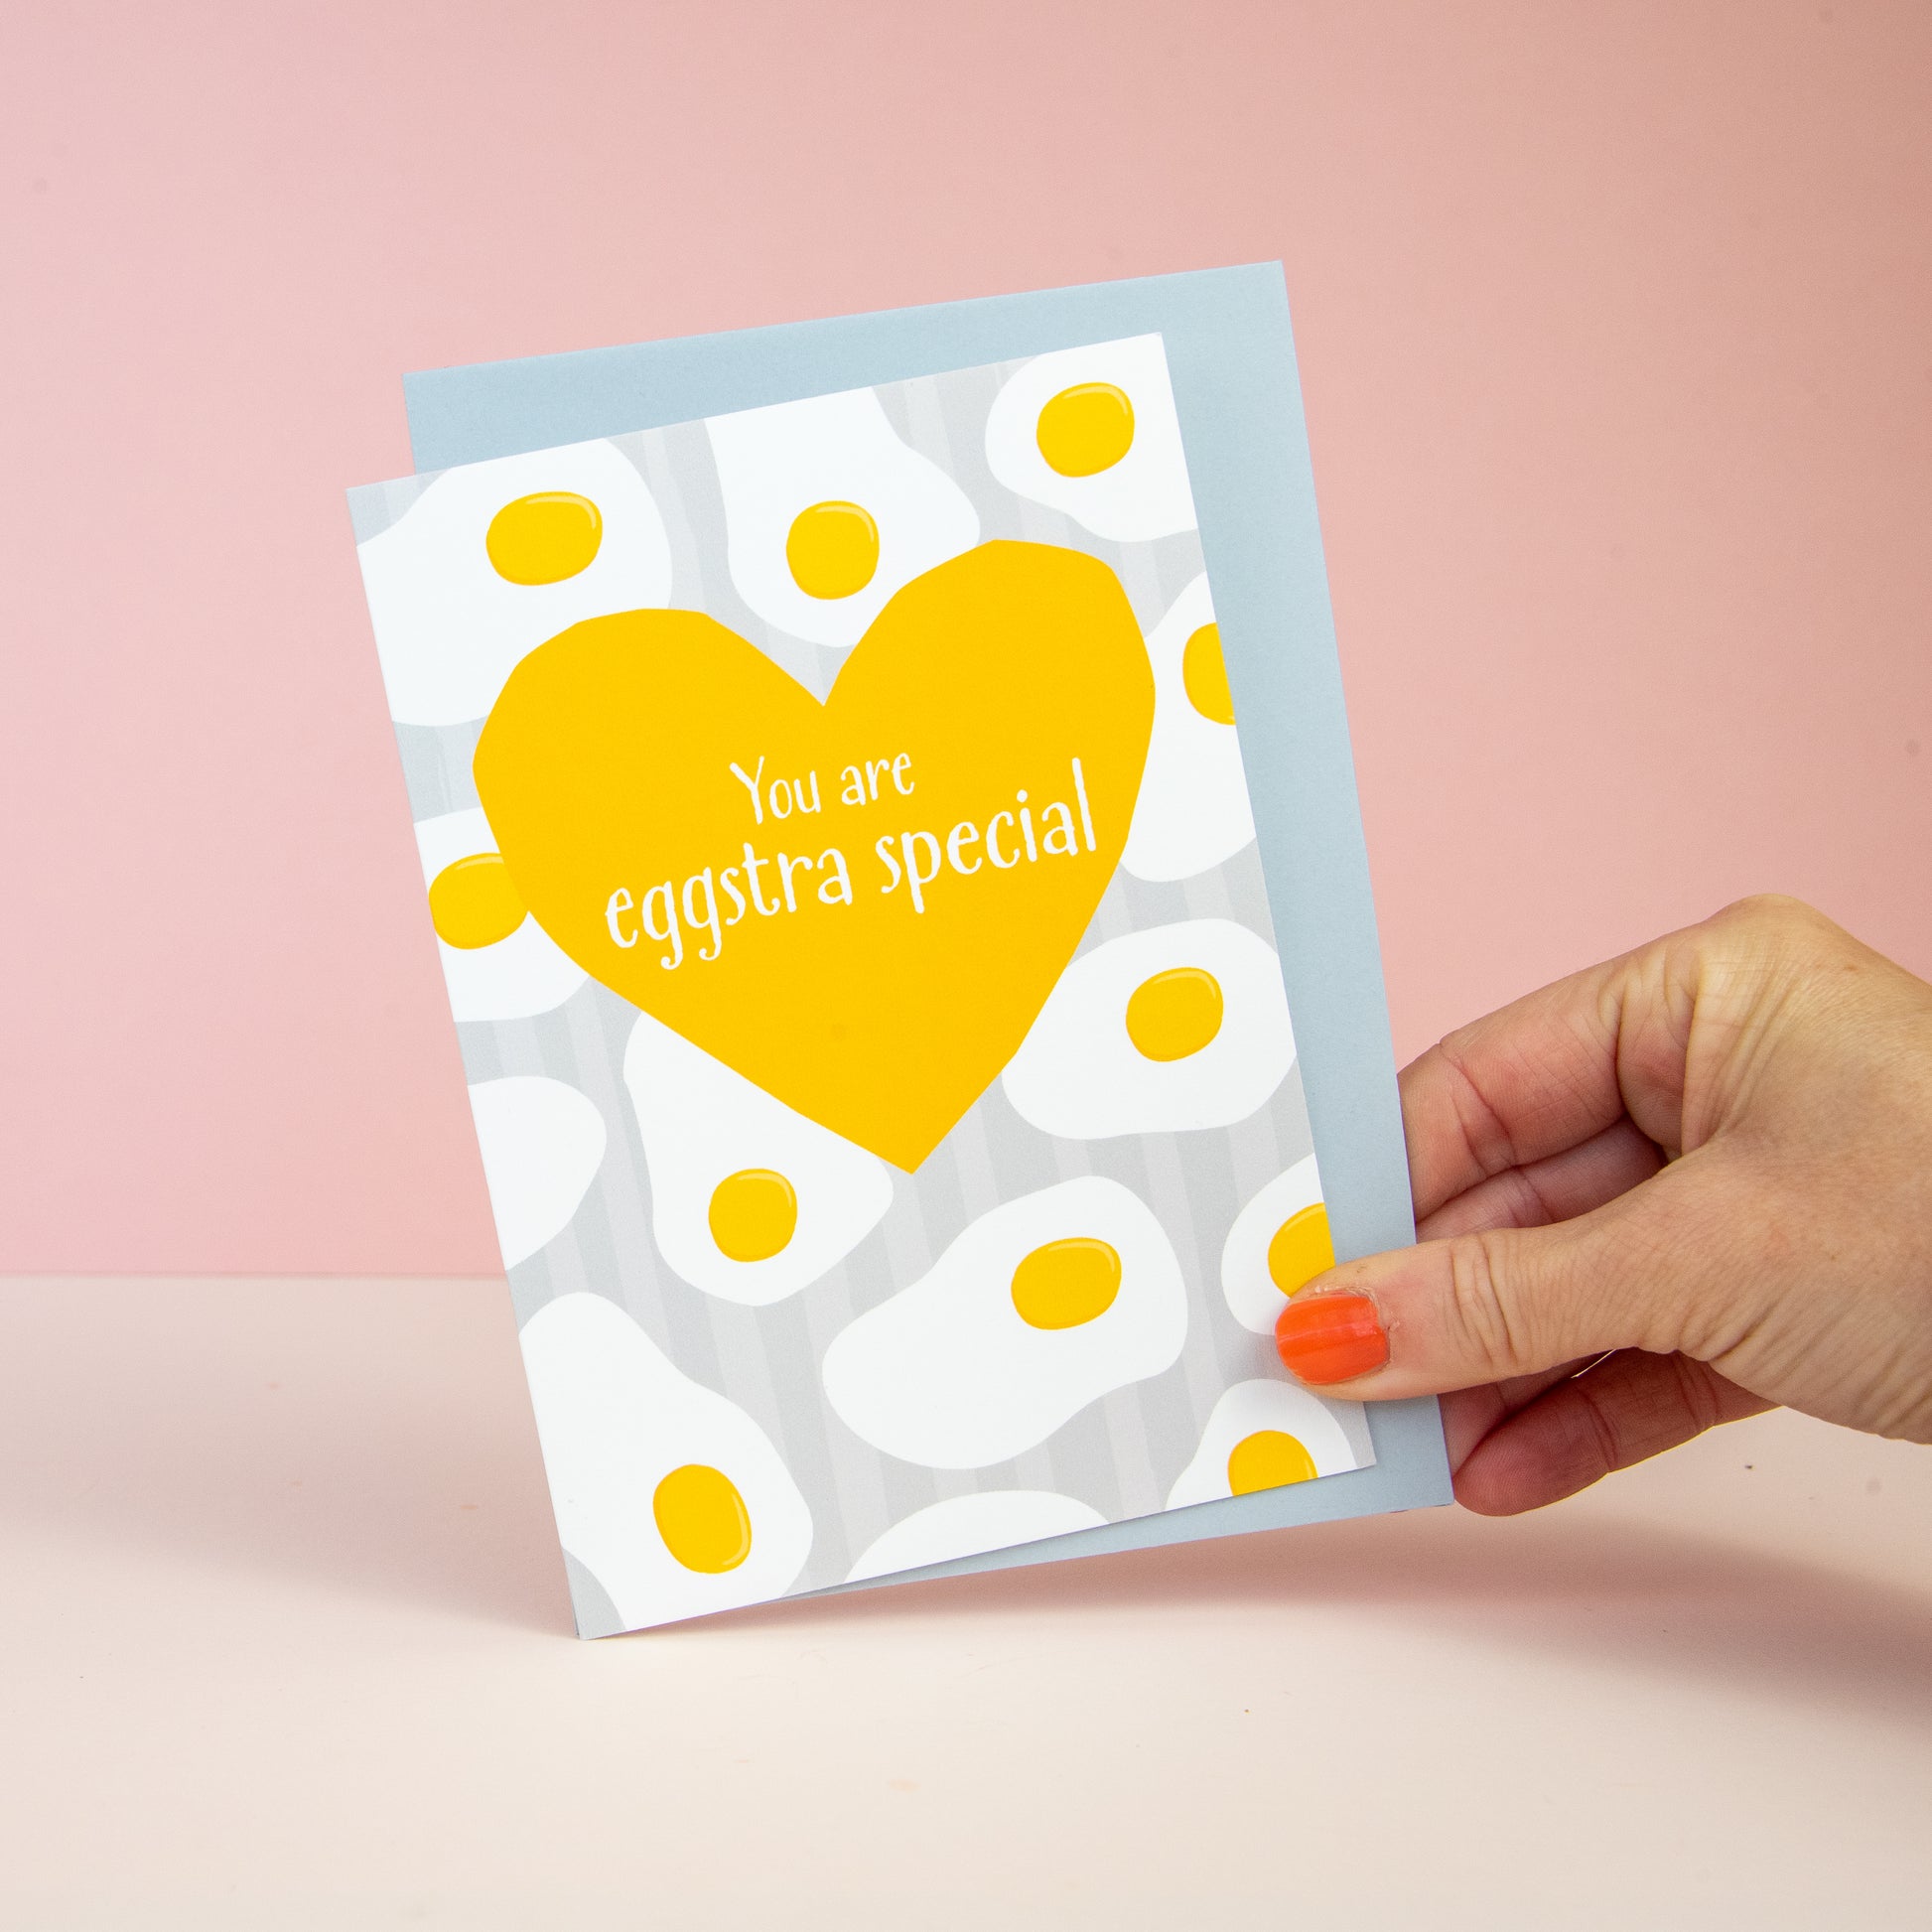 grey striped background with a pattern of fried eggs. a yellow heart and the wording your are eggstra special